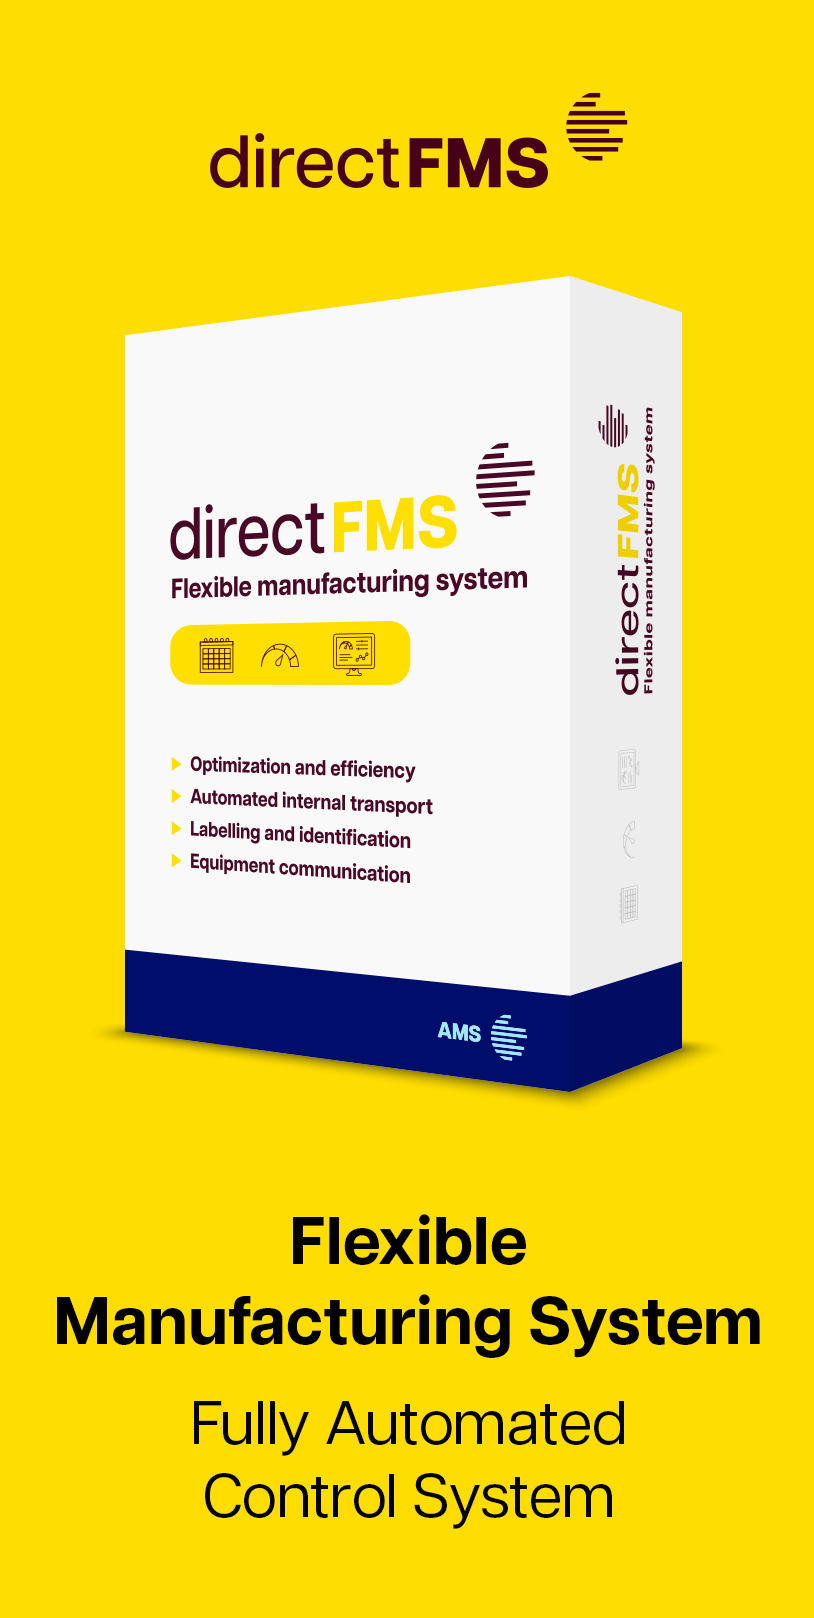 Our developed software family, direct, is launched in a new profile with a clear description of each product's functionality. direct MES, direct 24, direct FMS, direct FOOD, Manufacturing Execution System, Flexible Manufacturing System